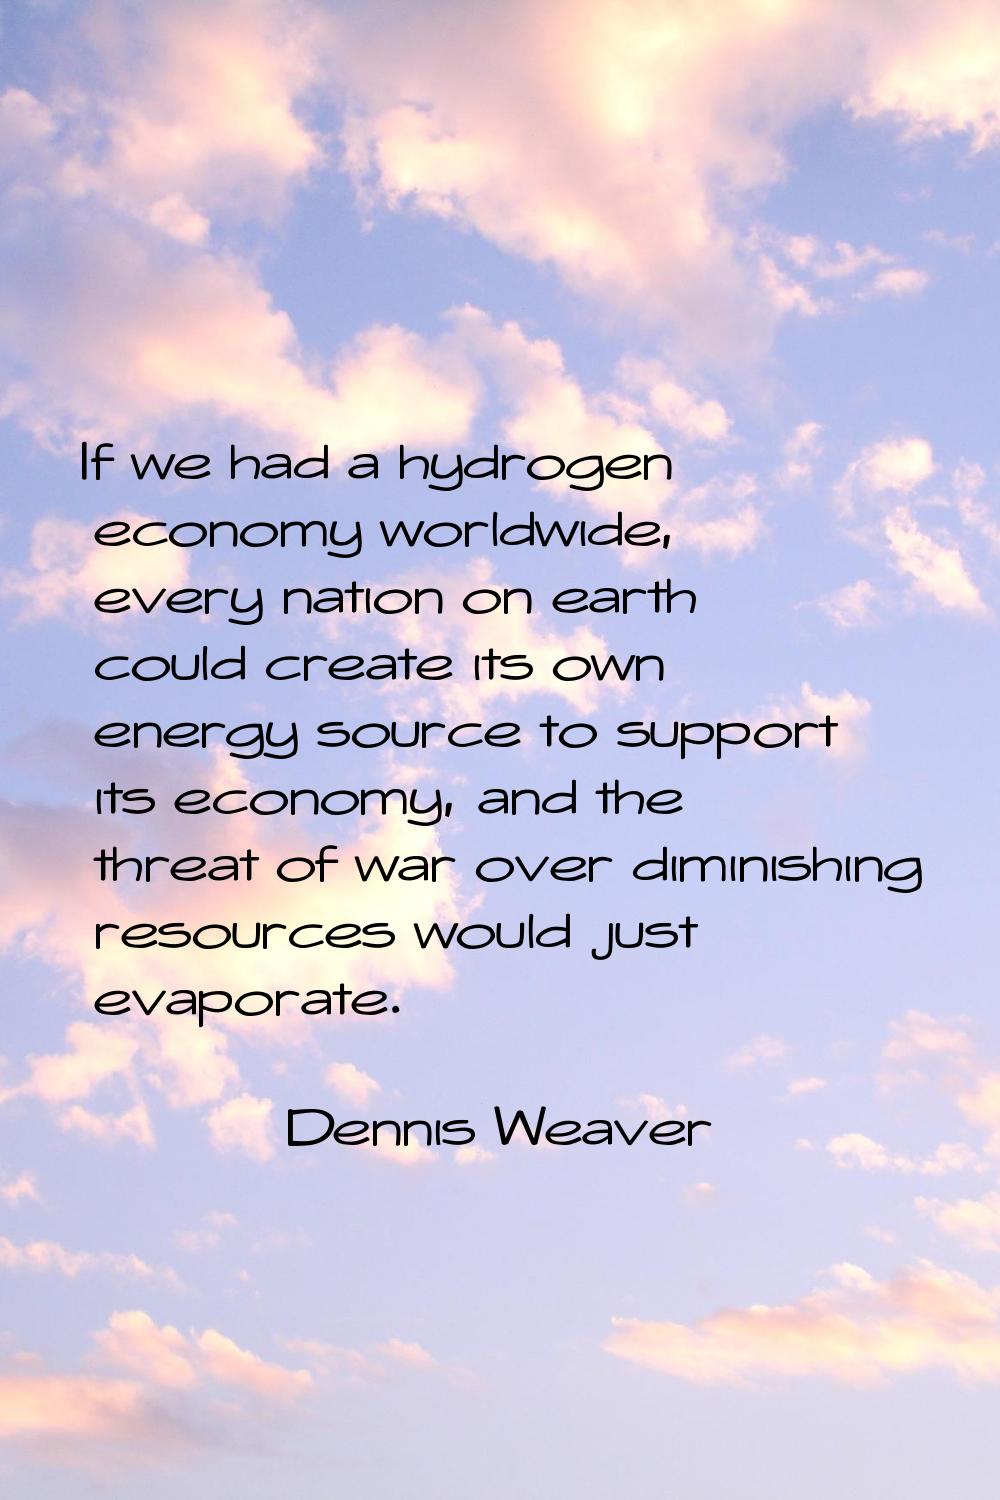 If we had a hydrogen economy worldwide, every nation on earth could create its own energy source to